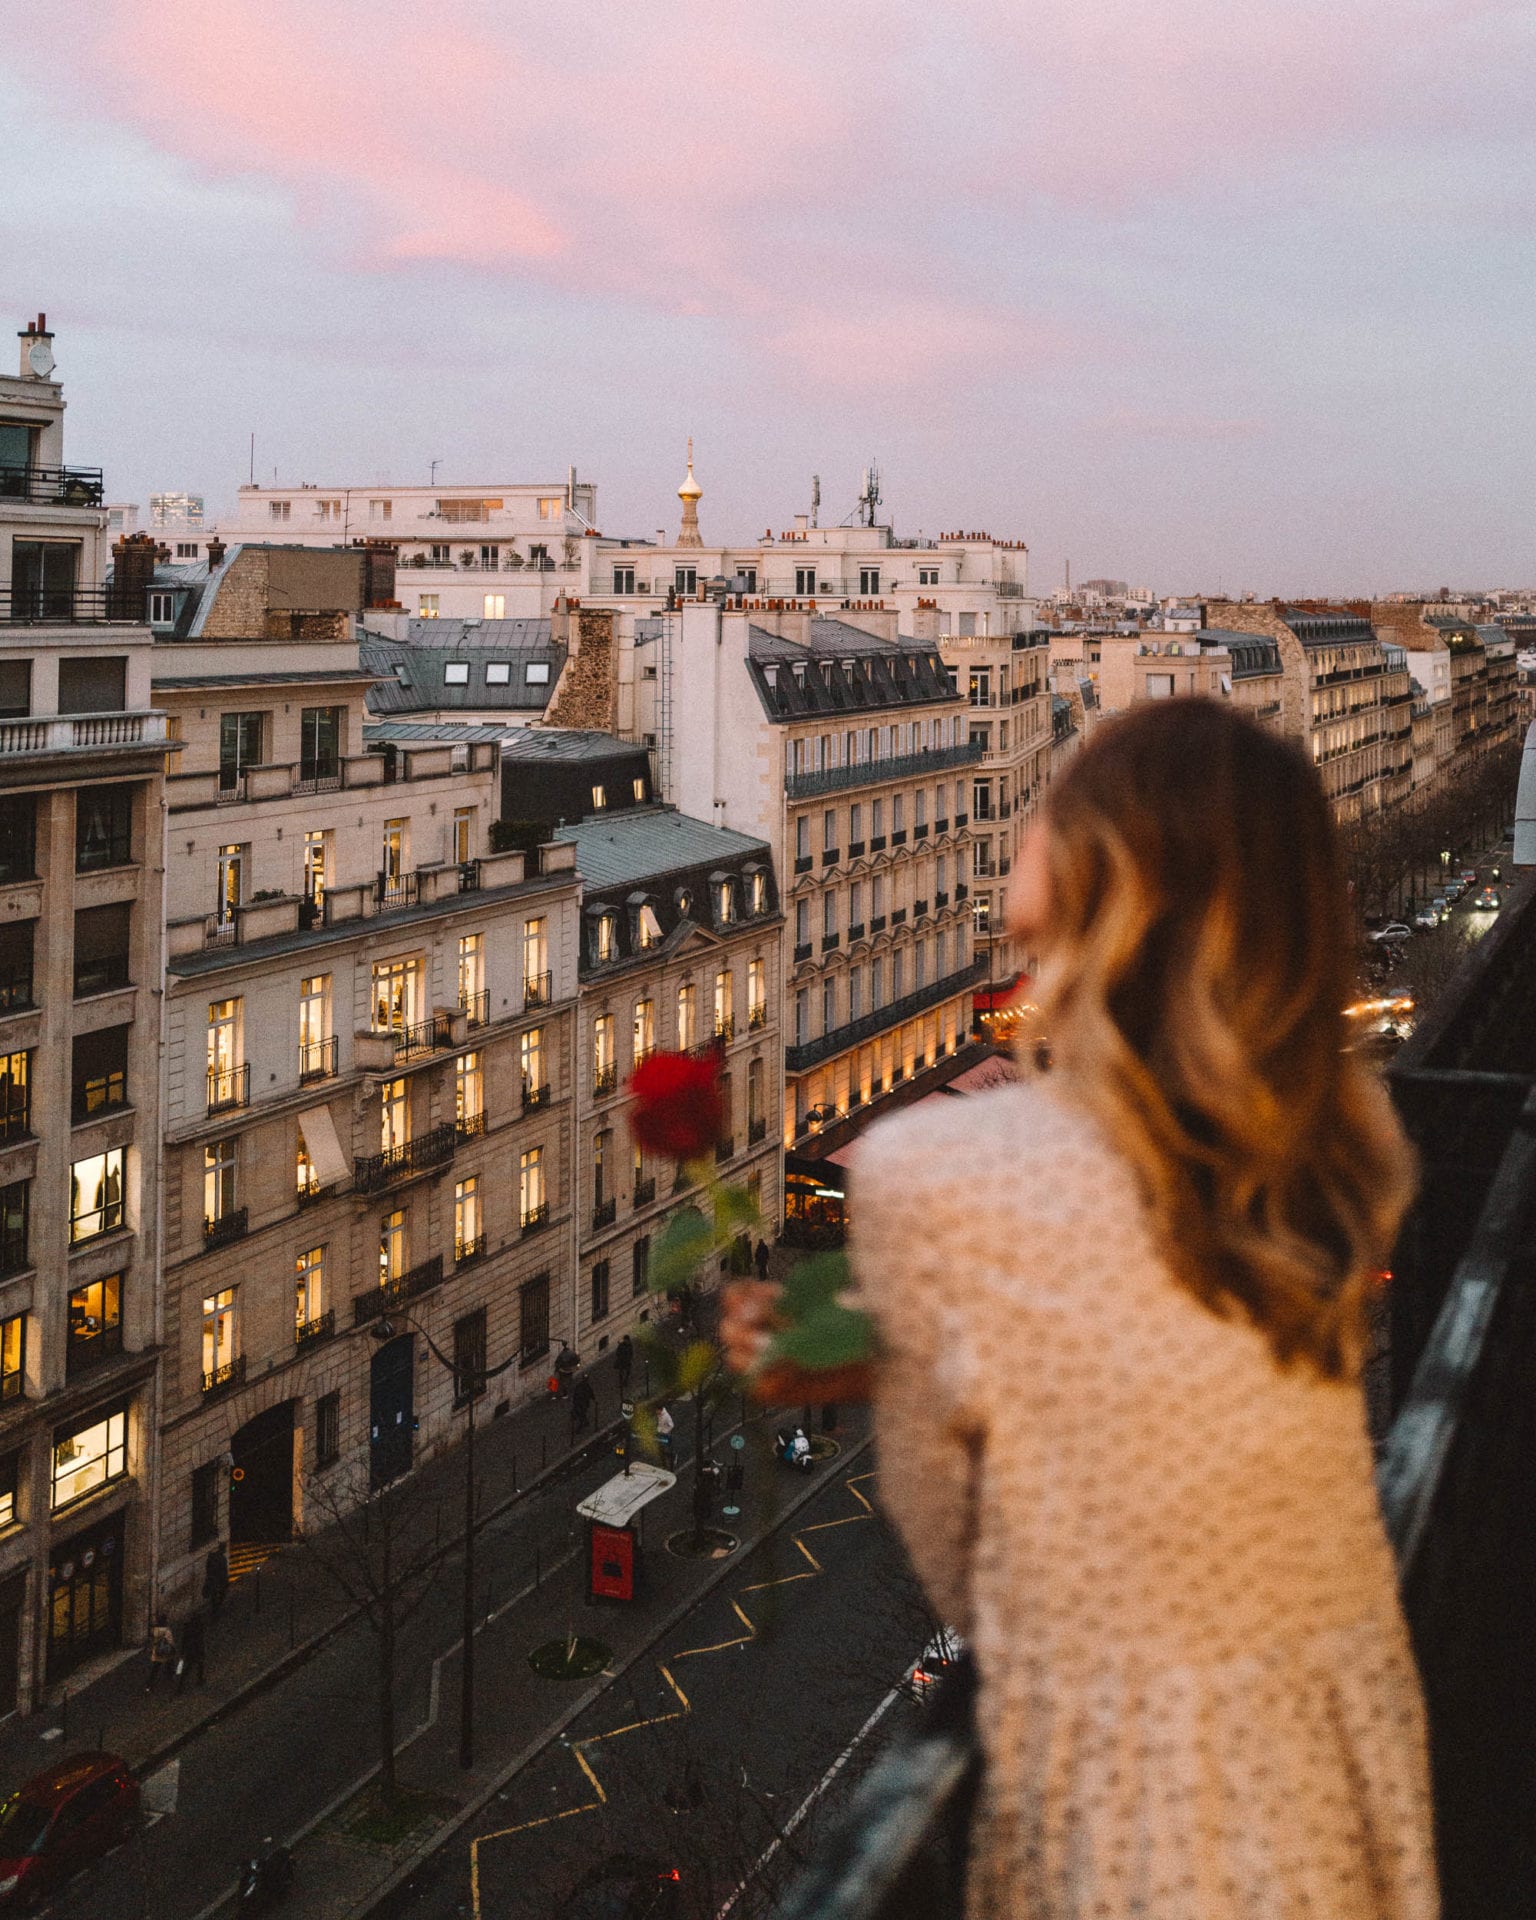 Sunset from our balcony at Le Royal Monceau Hotel in Paris for Valentine's Weekend